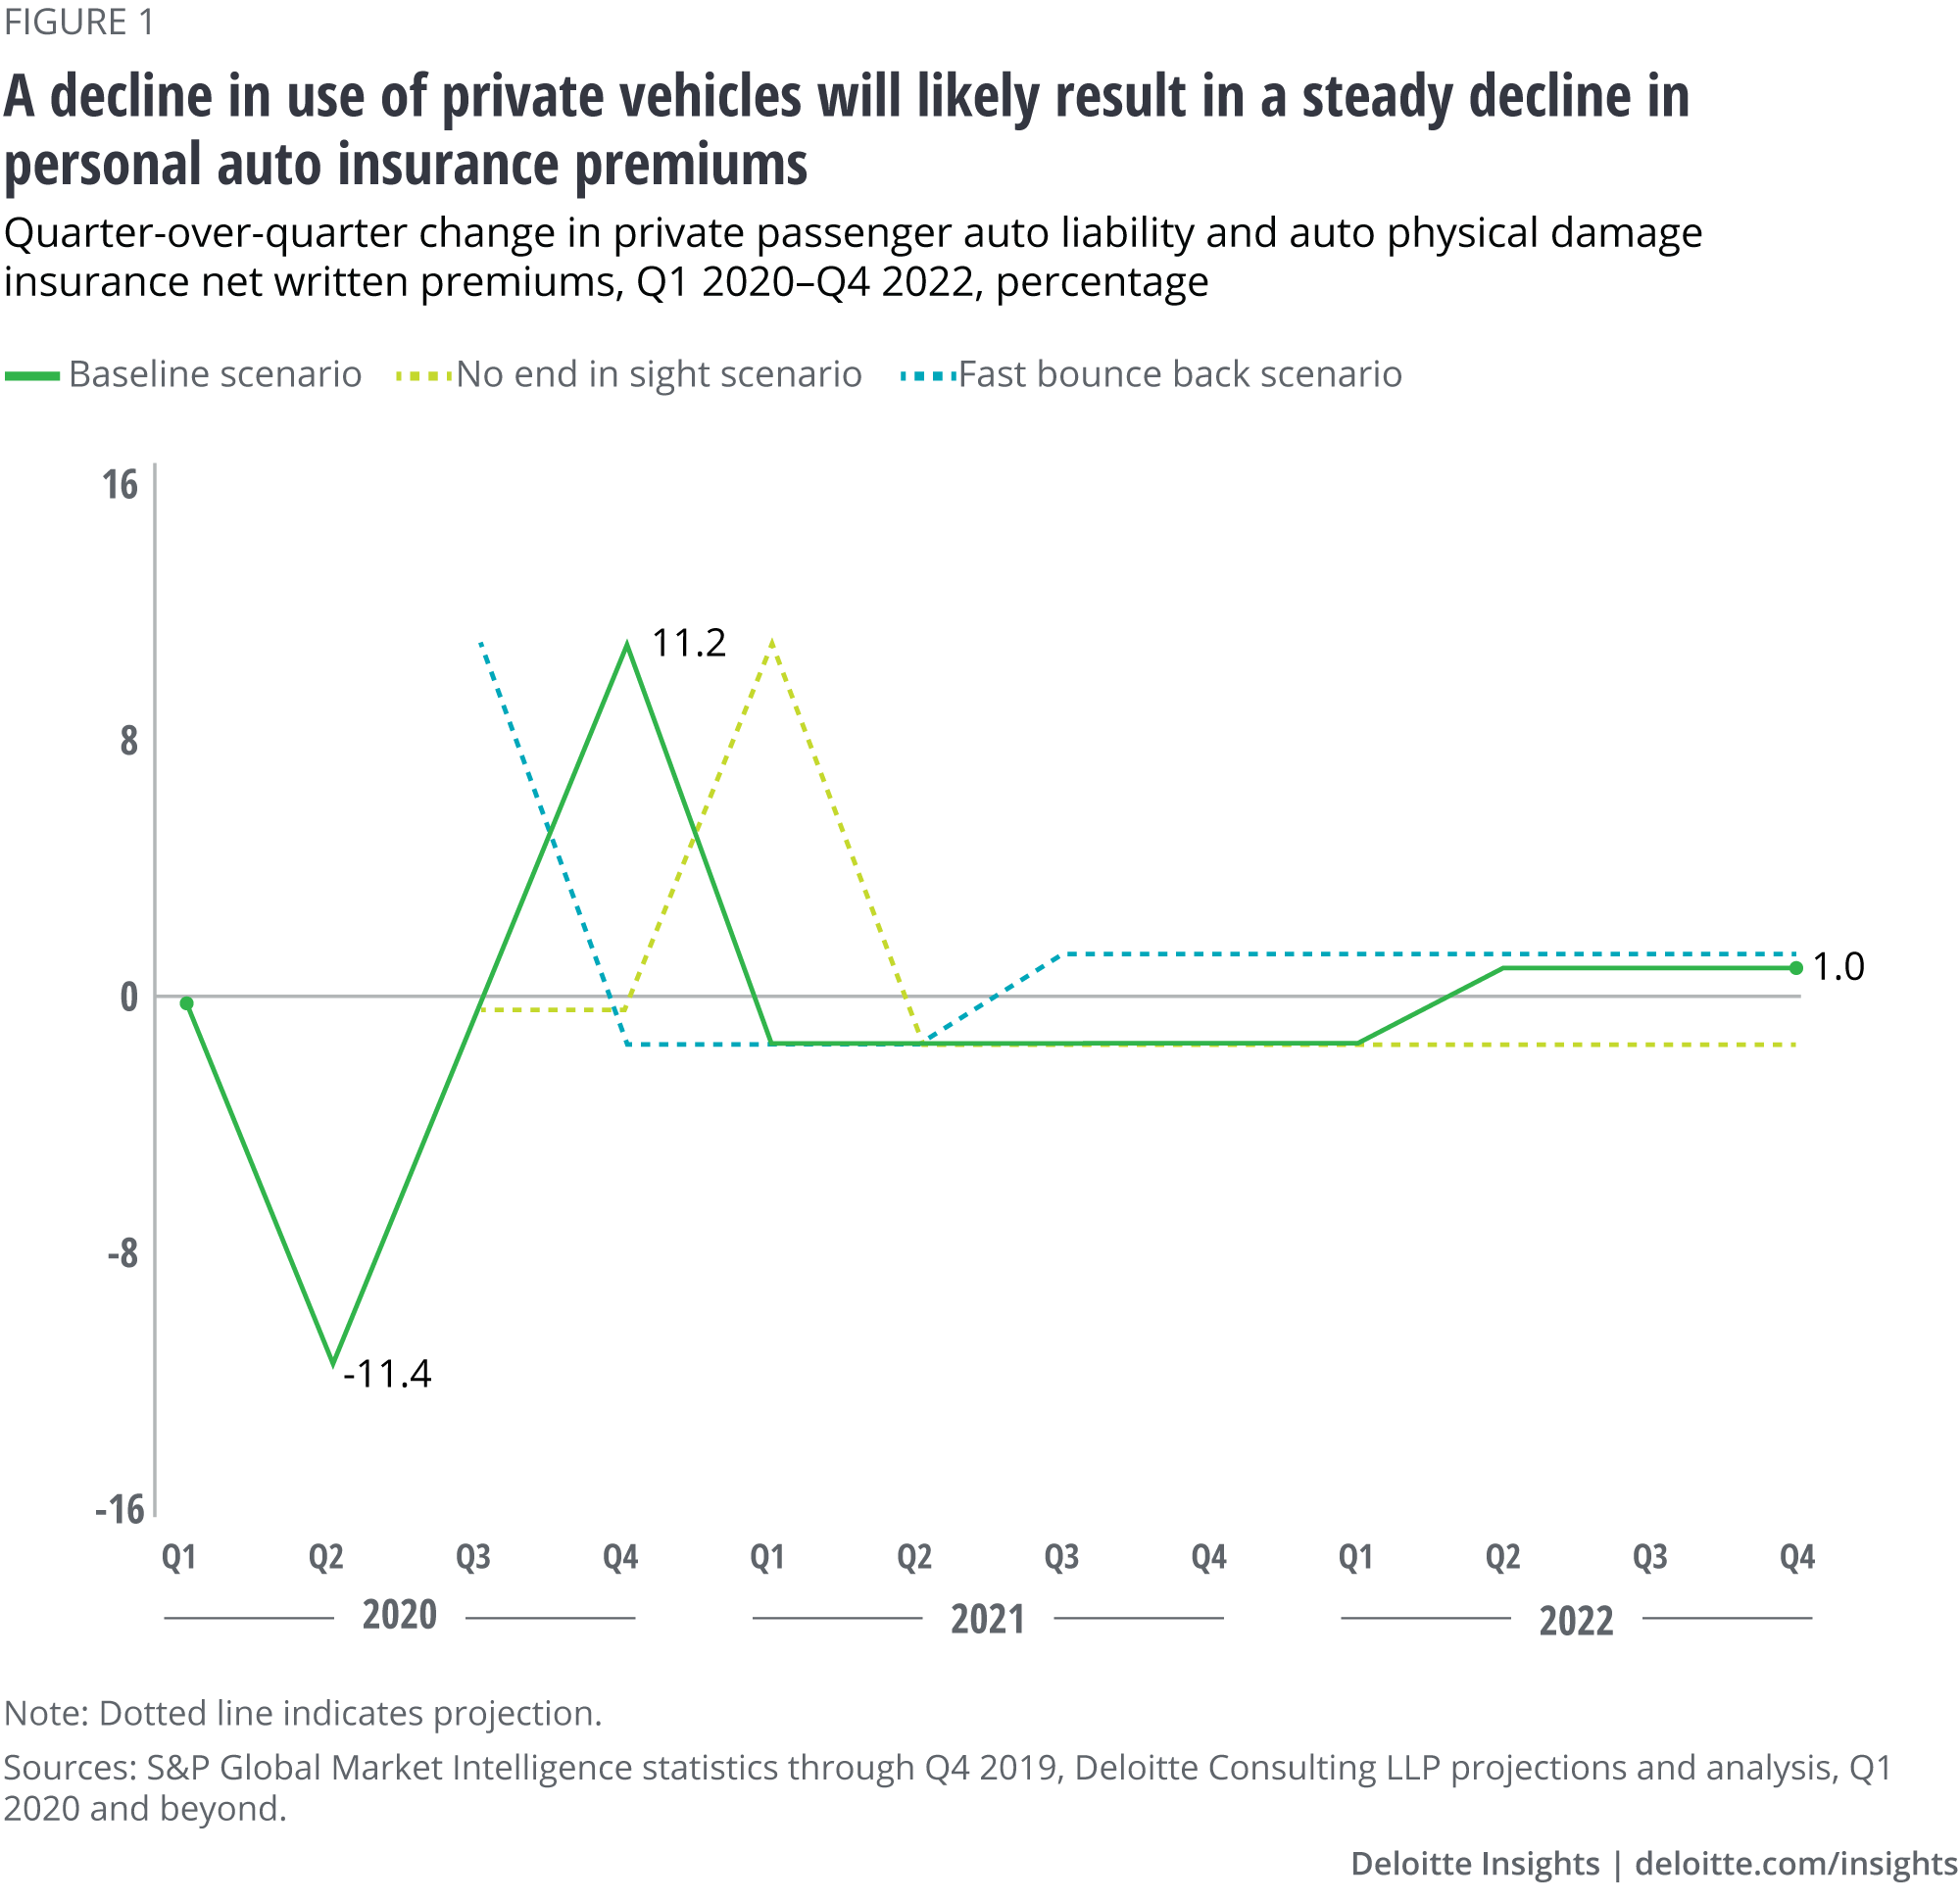 A decline in the use of private vehicles will likely result in a steady decline in personal auto insurance premiums